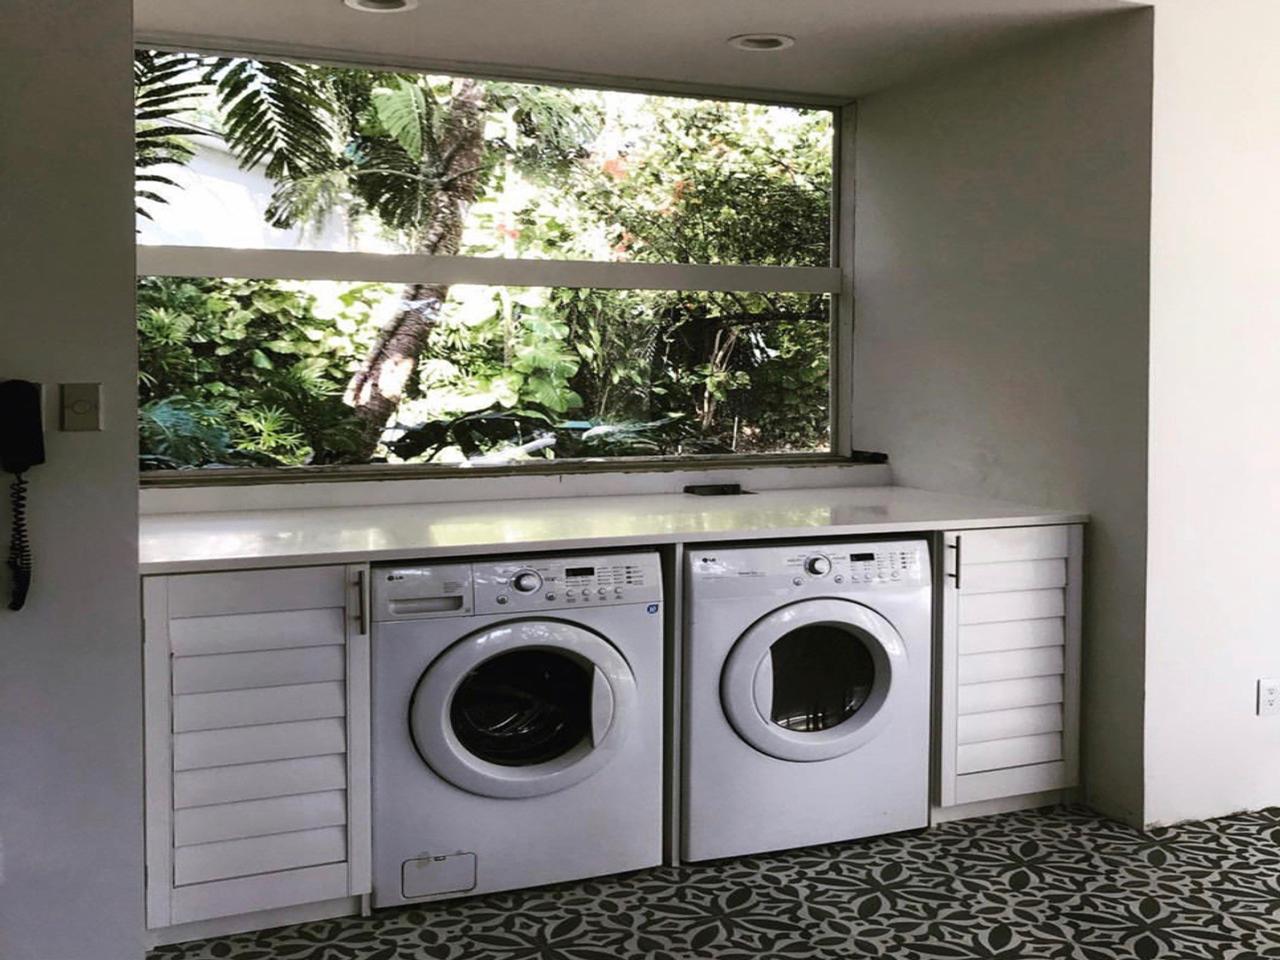 shutter doors next to a washer and dryer